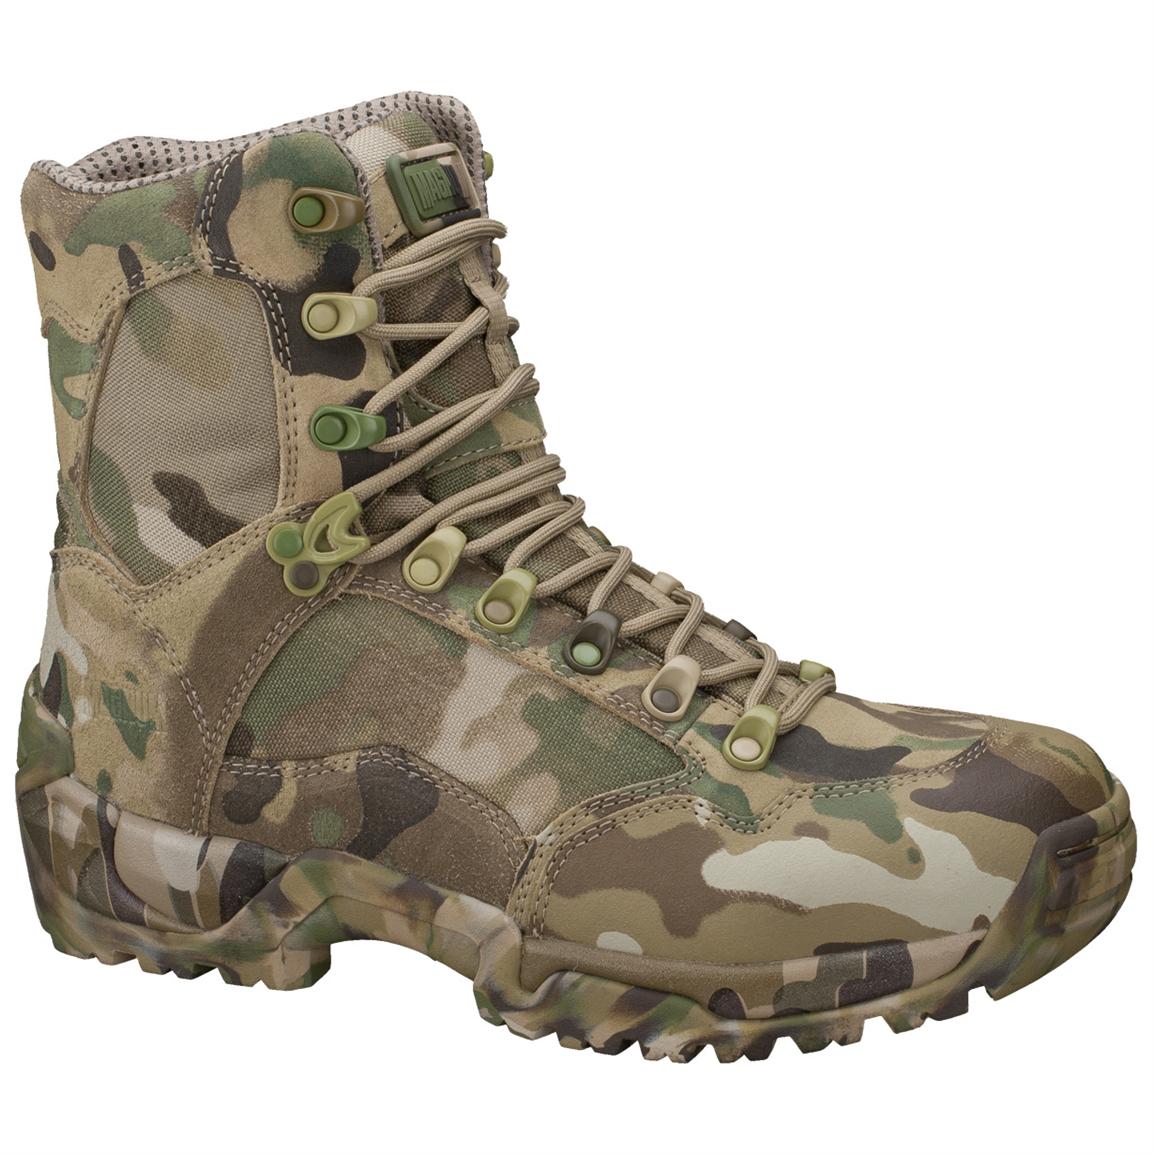 Buy > magnum camo boots > in stock